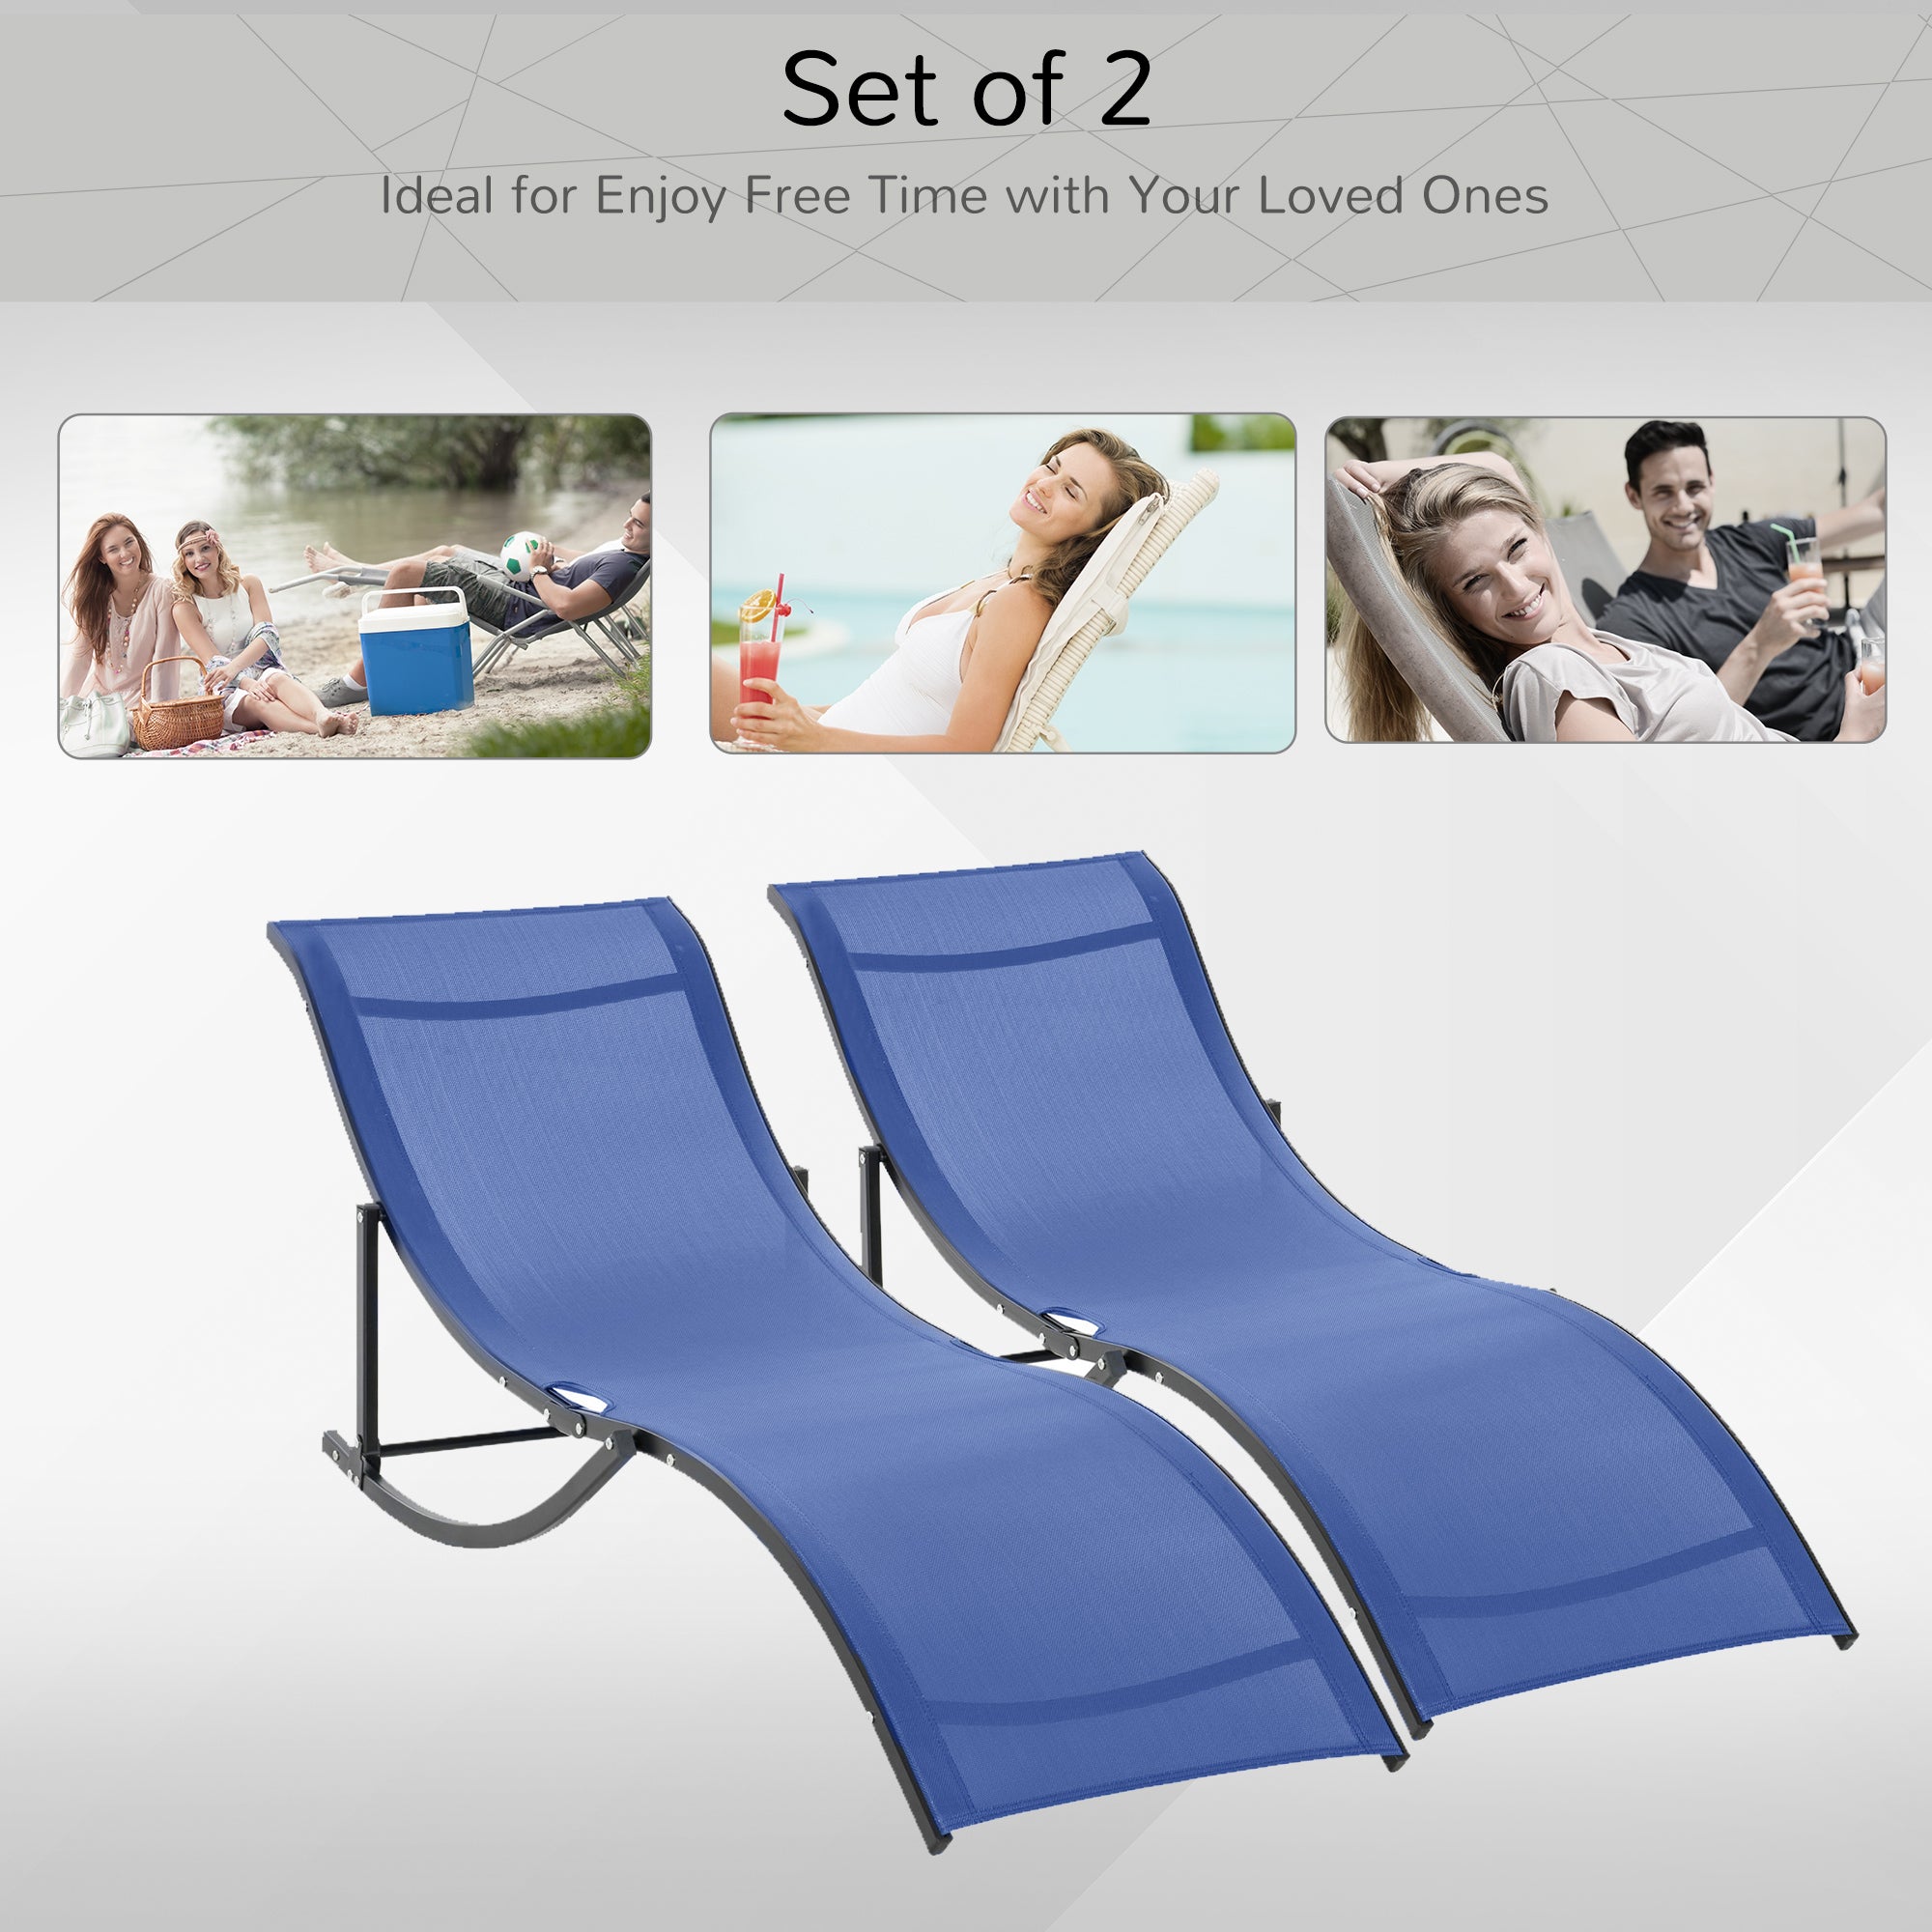 Outsunny Set of 2 S-shaped Foldable Lounge Chair Sun Lounger Reclining Outdoor Chair for Patio Beach Garden Blue - Inspirely